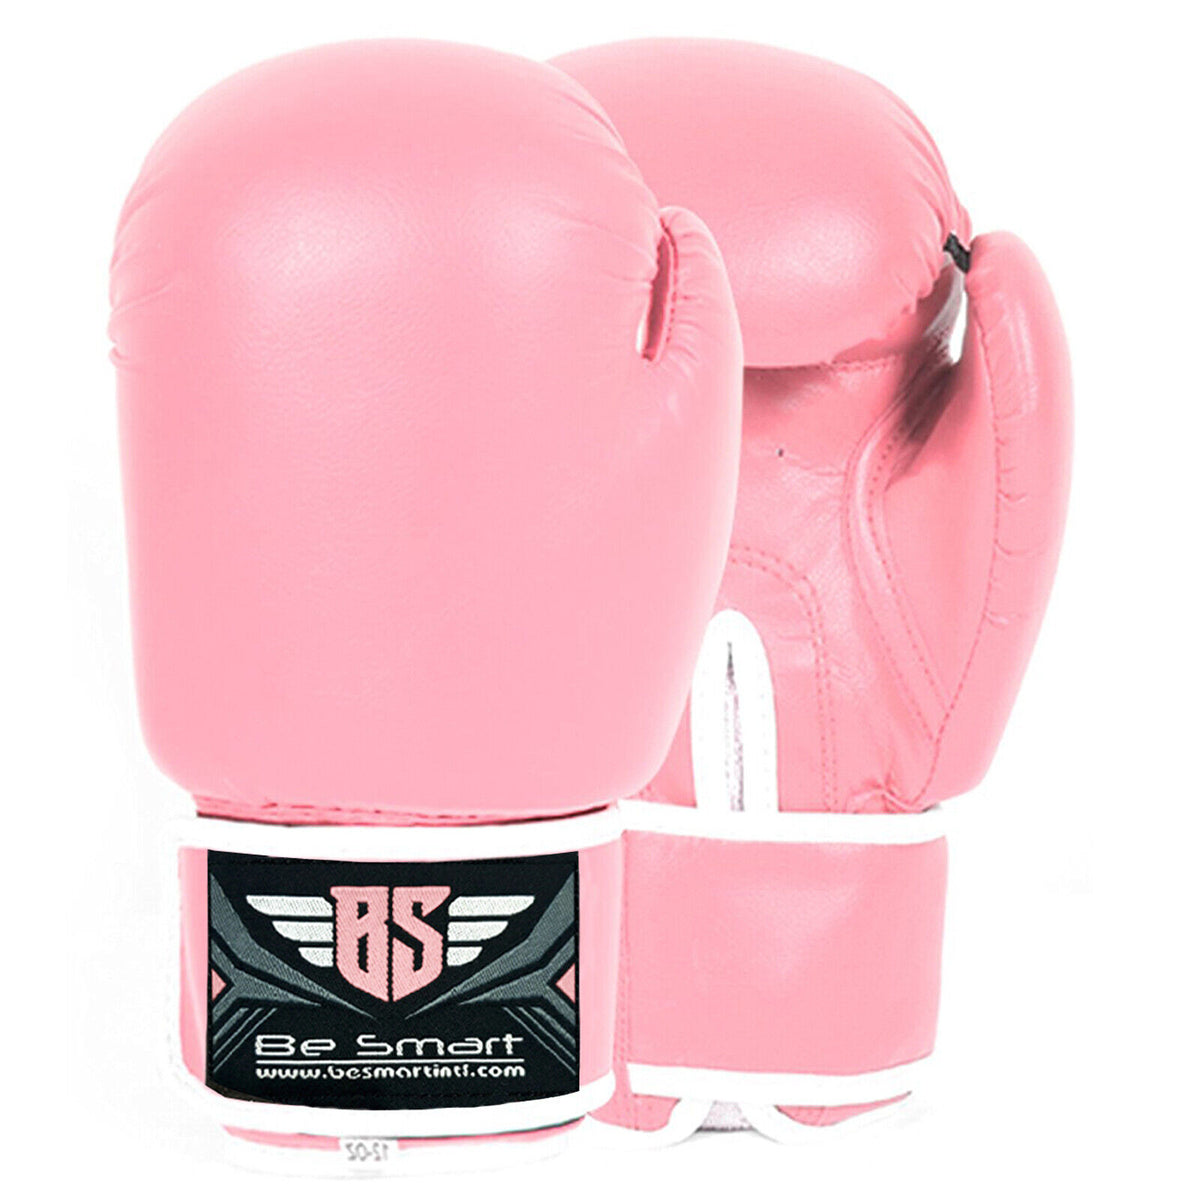 Boxing Pads and Gloves Set - Ladies Boxing Gloves & Focus Pads